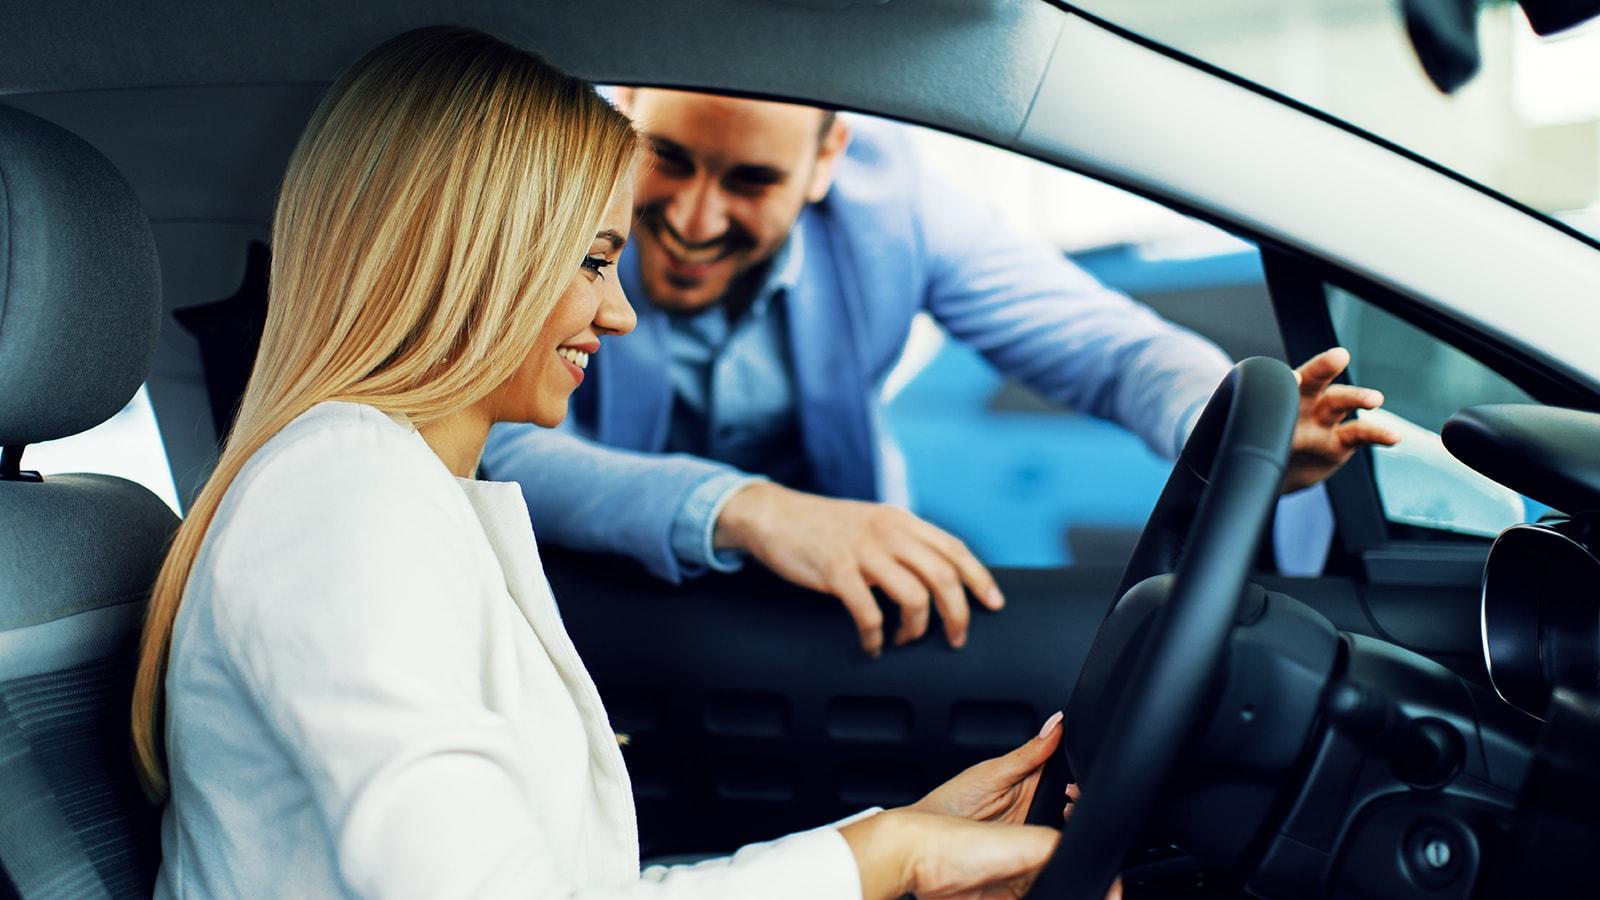 Smiling woman in a dealership sitting in a new vehicle